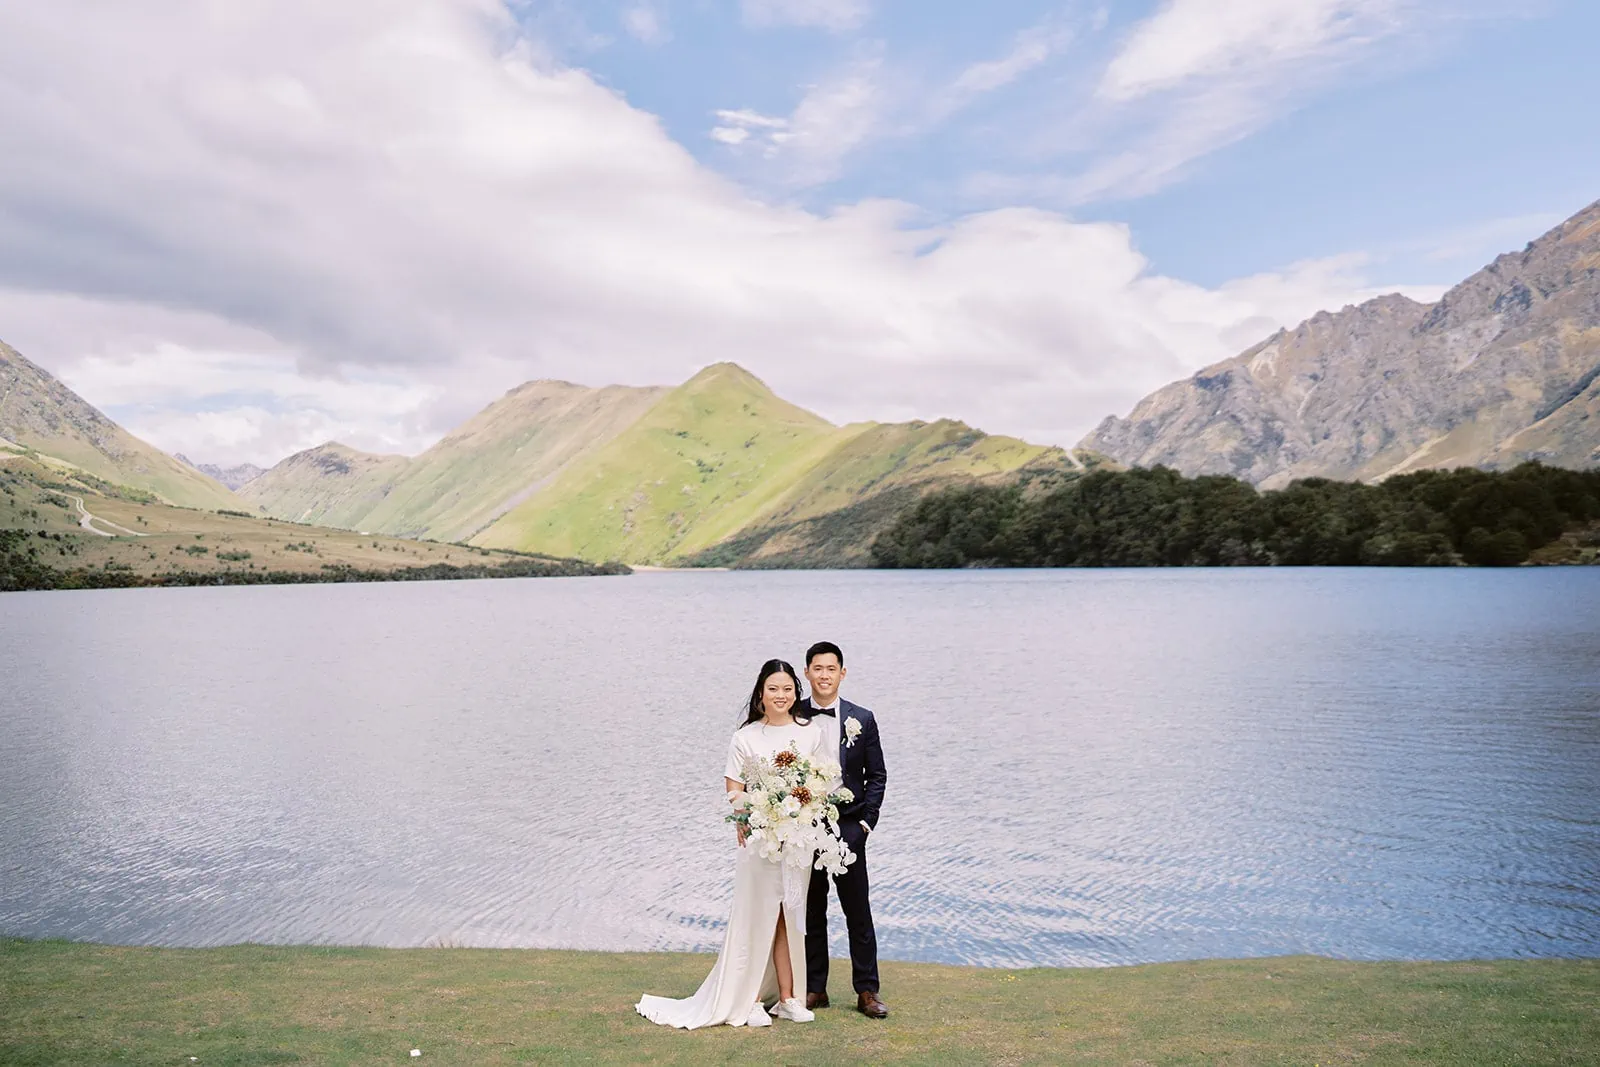 Queenstown Elopement Heli Wedding Photographer クイーンズタウン結婚式 | A couple's Pre-wedding photoshoot by a lake in New Zealand.